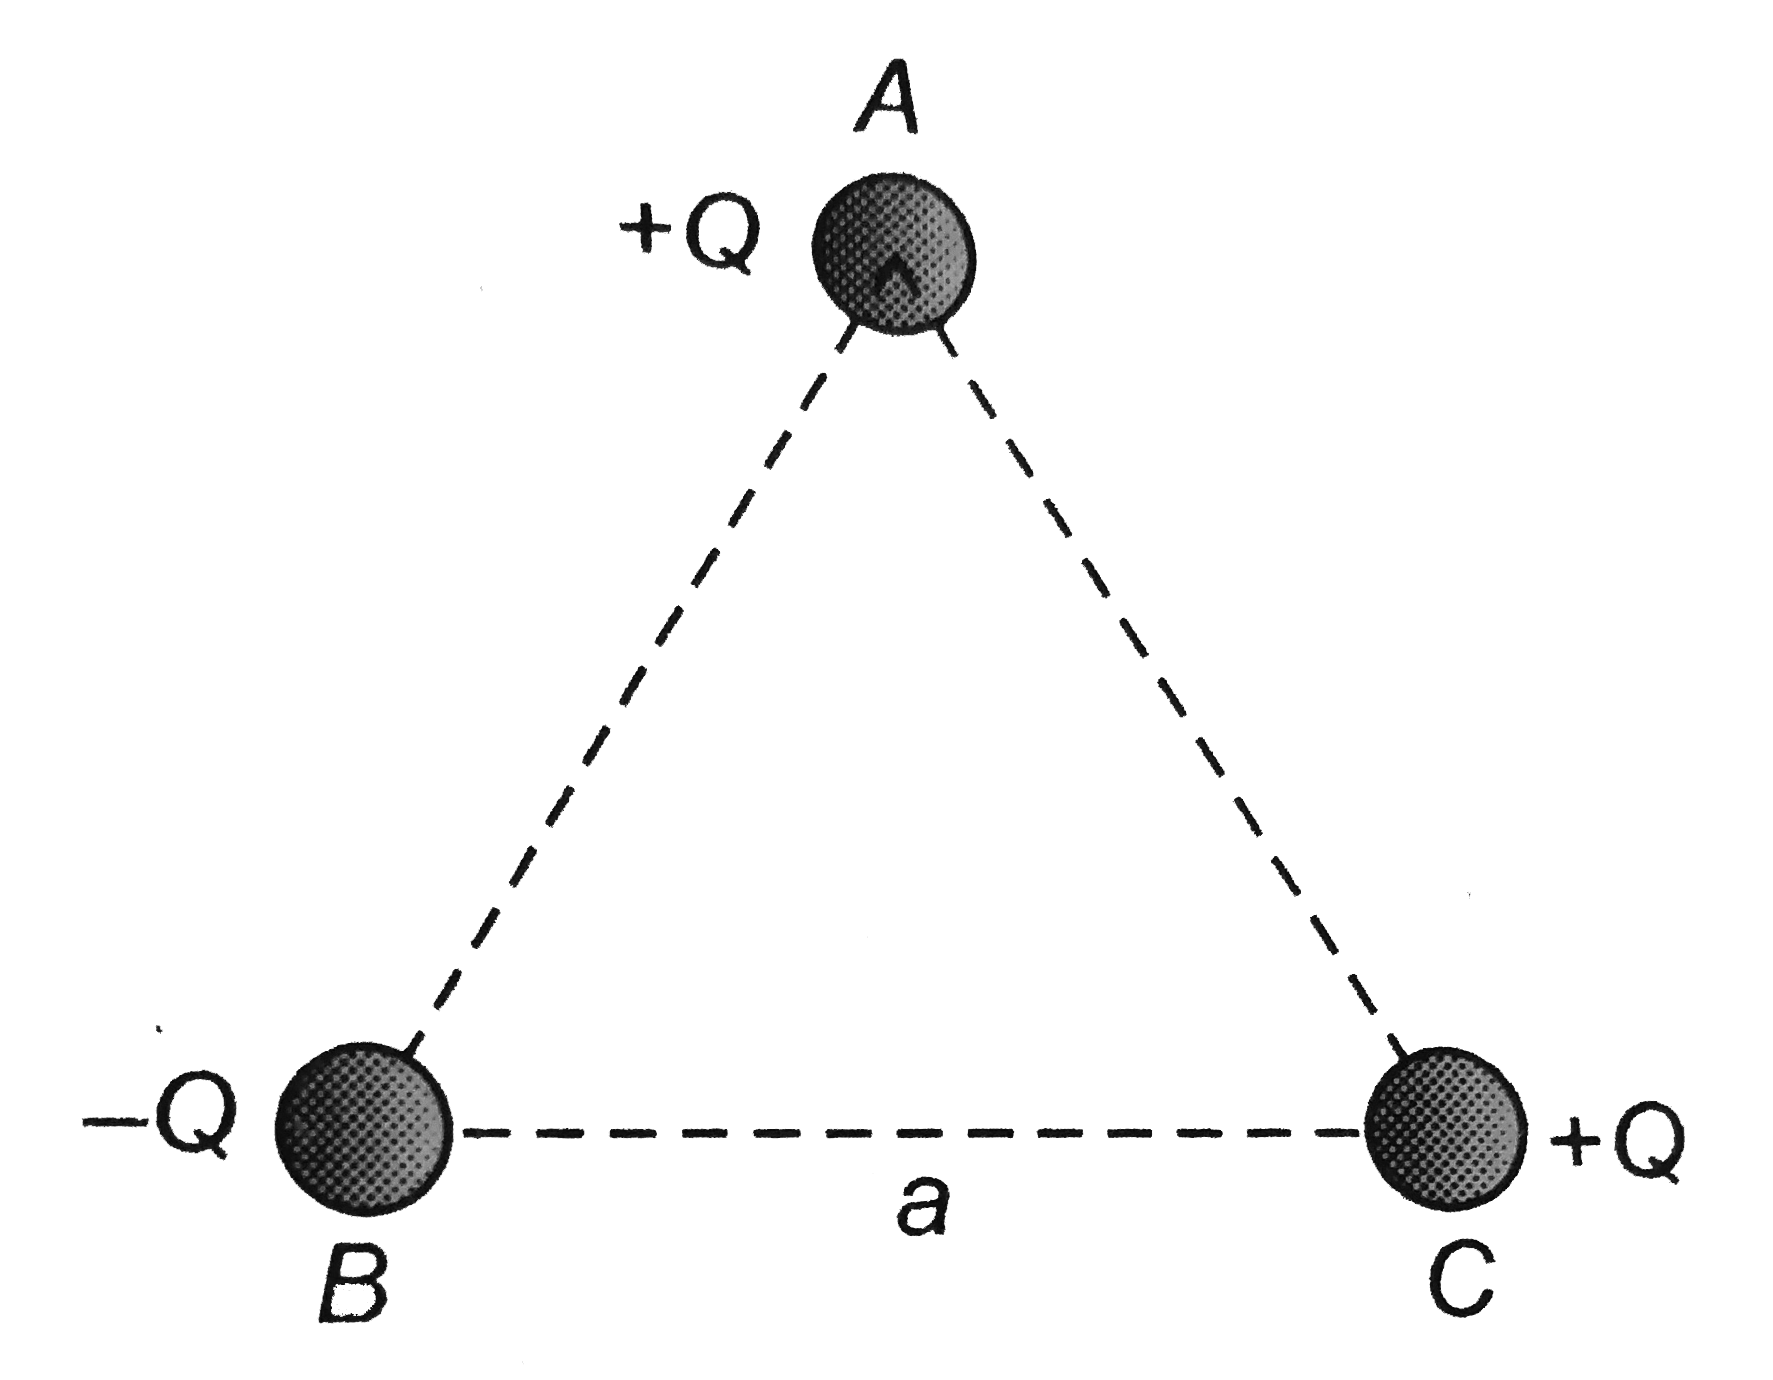 Three charges are placed at the vertices of an equilateral triangle of side a as shown in the following figure. The force experienced by the charge placed at the vertex A in a direction normal to BC is